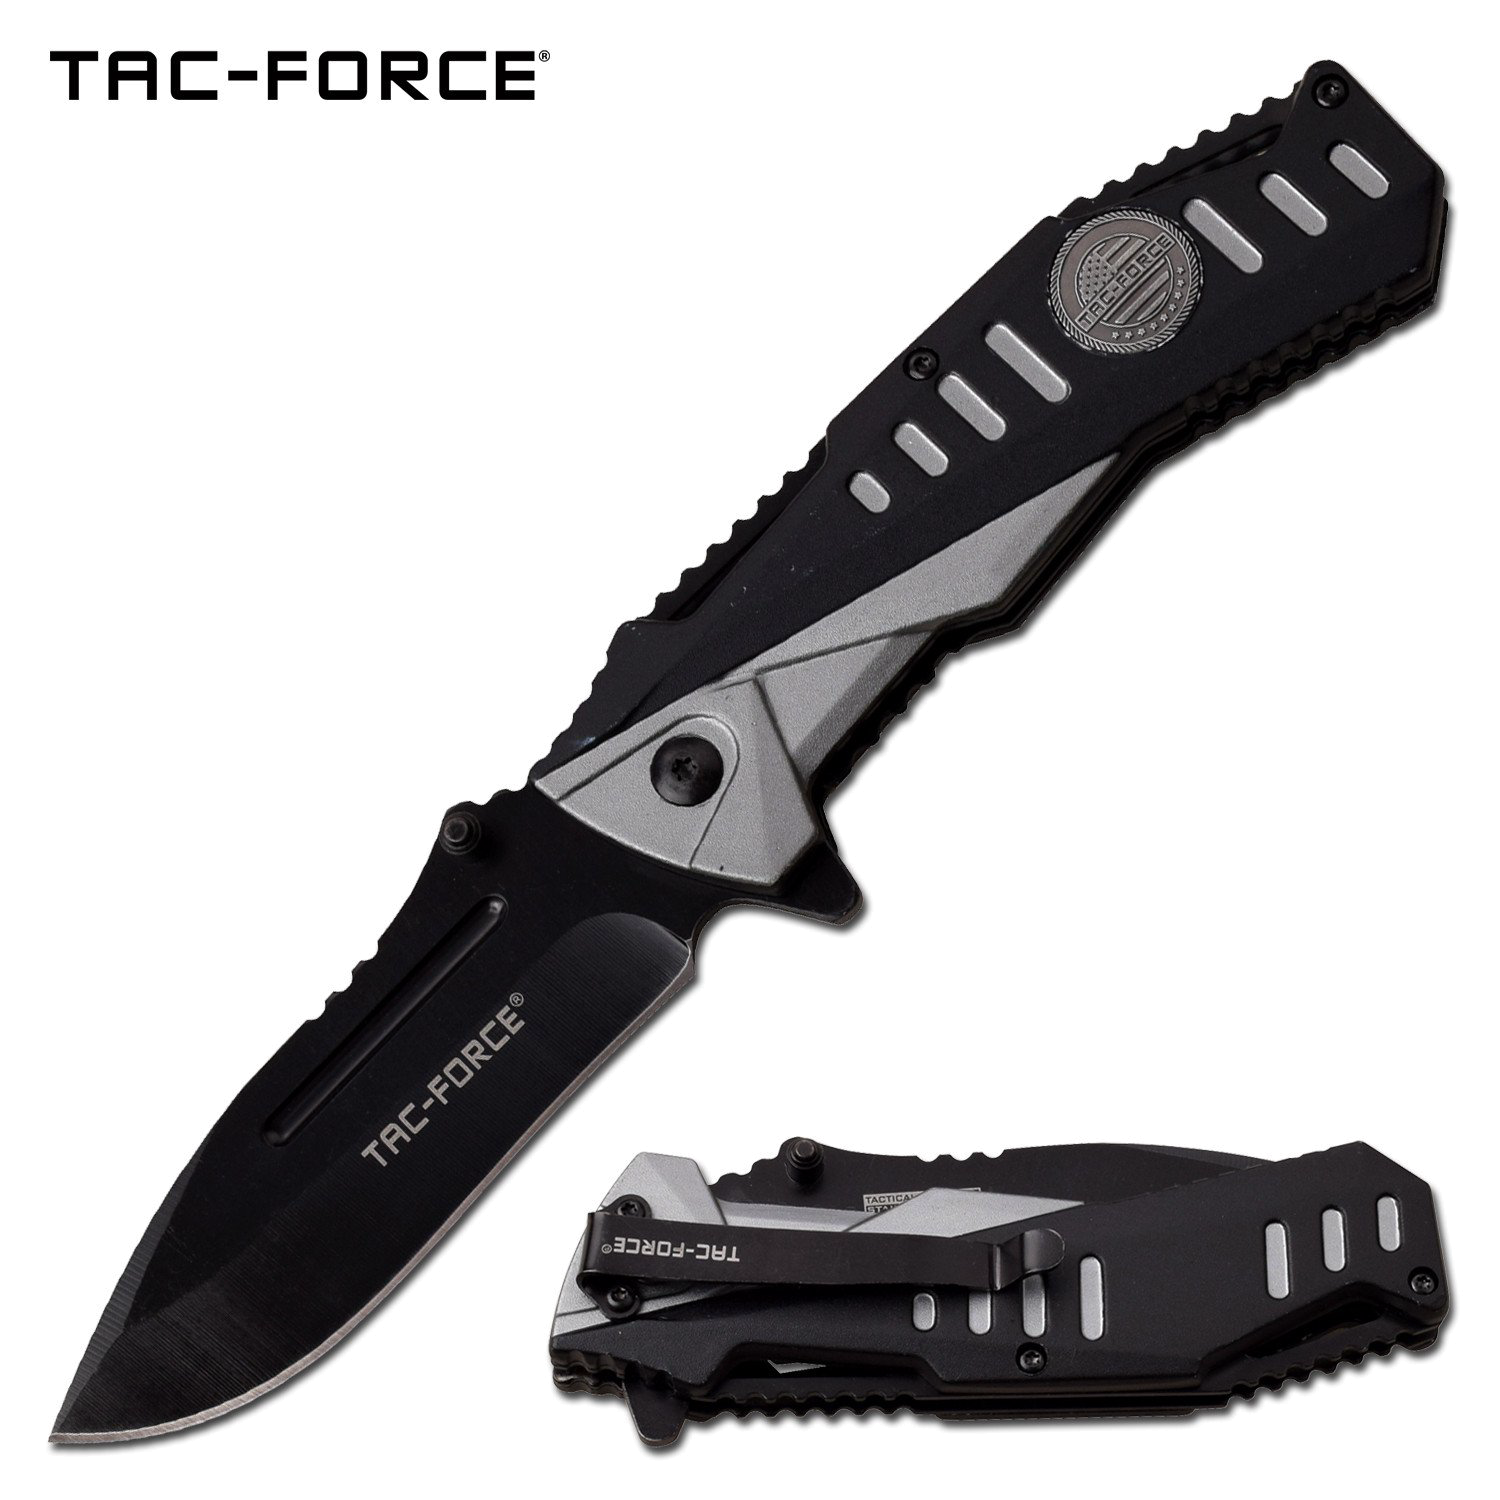 product image for Tac-Force EDC Tactical Folding Knife Gray - Model 3.5 Black Drop Blade